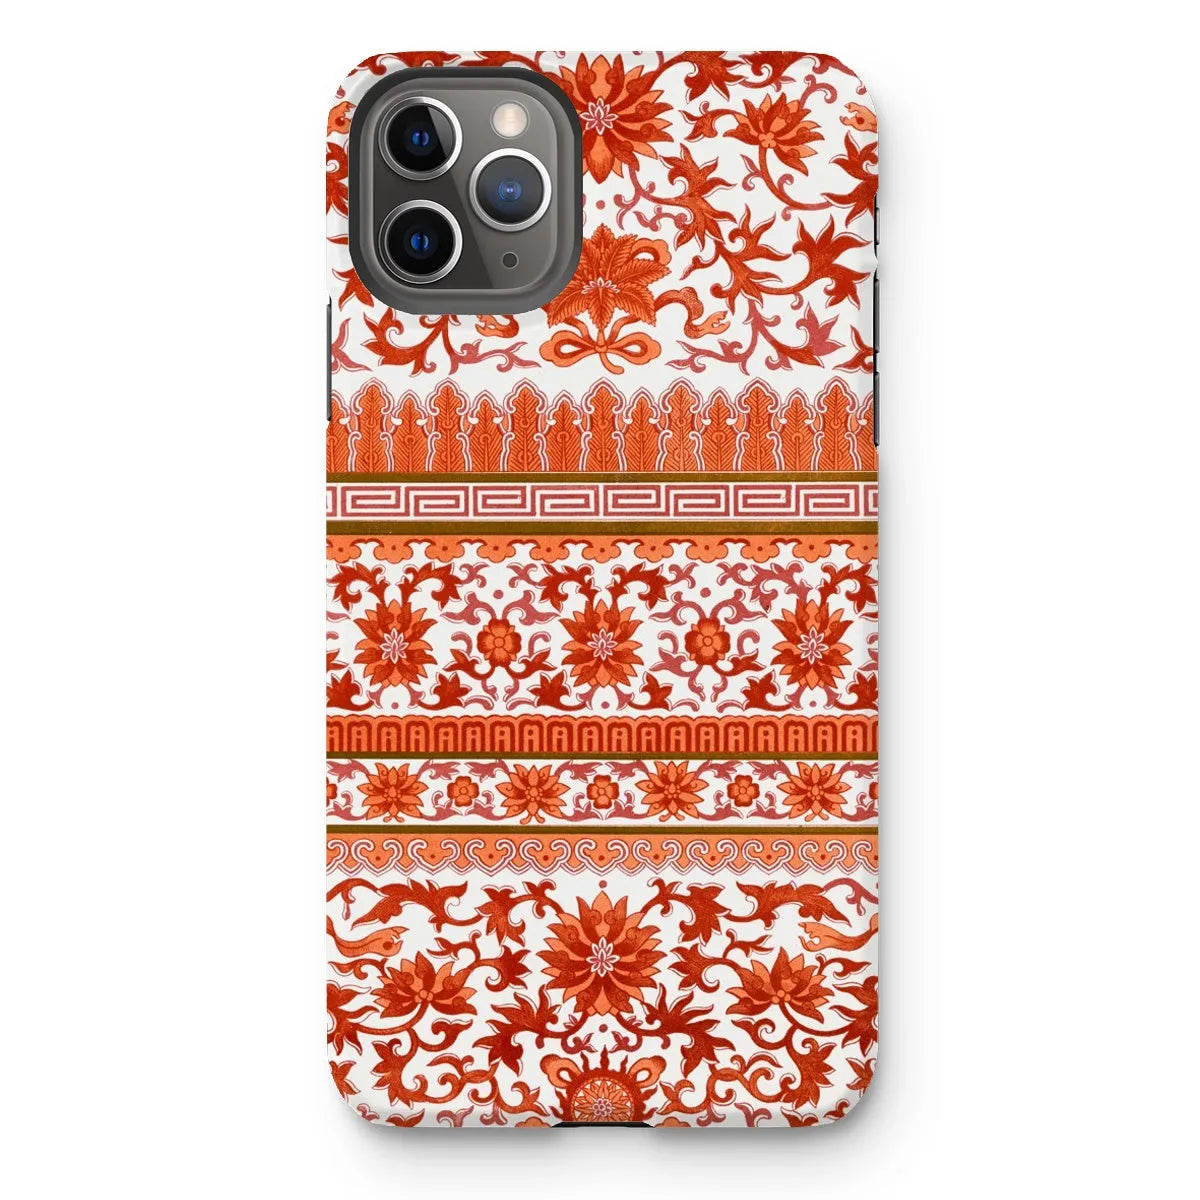 Fiery Chinese Floral Aesthetic Art Phone Case - Owen Jones - Iphone 11 Pro Max / Matte - Mobile Phone Cases - Aesthetic